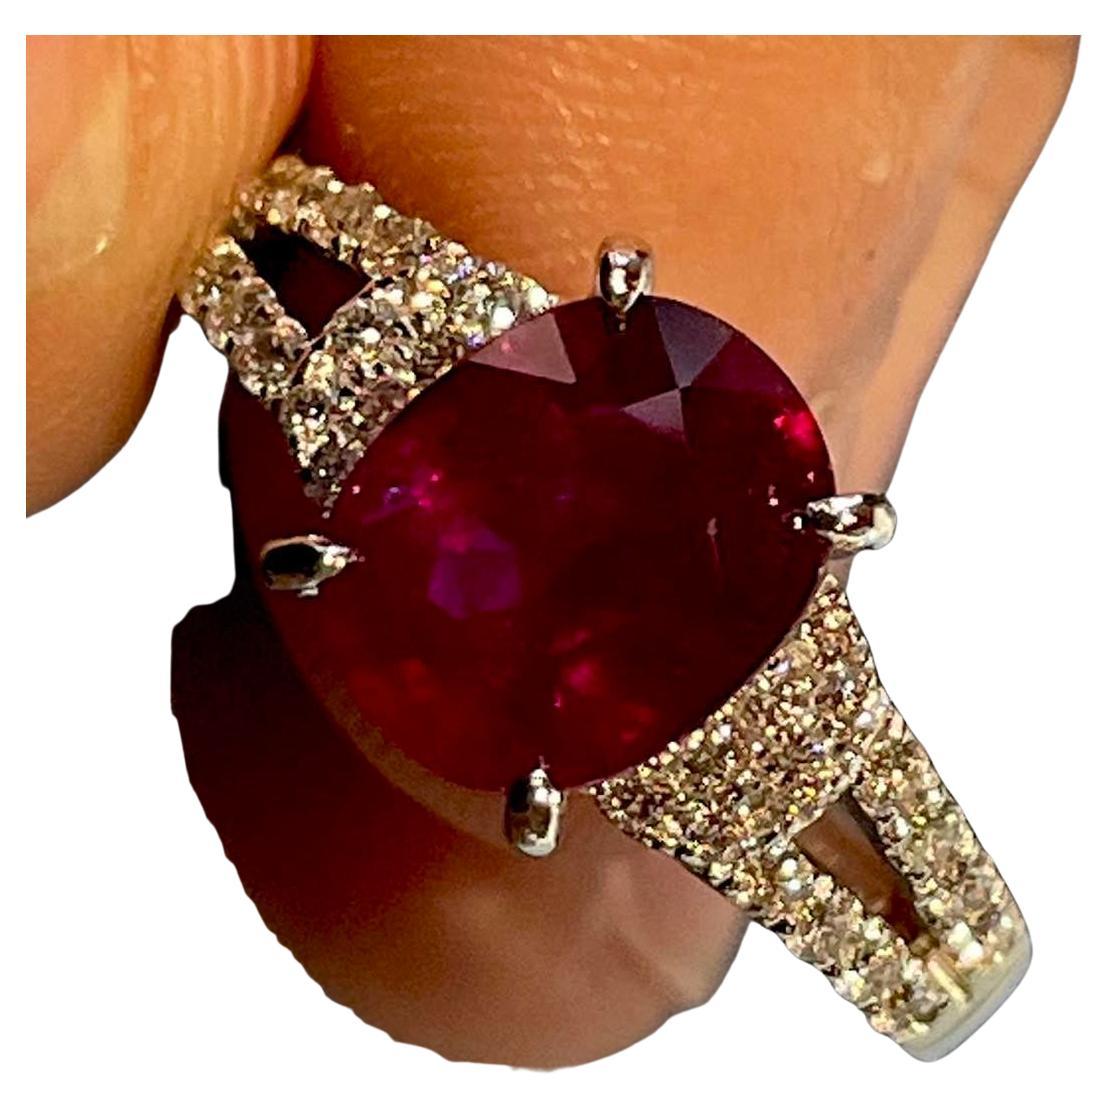 TDUGR Certfied Ruby Ring 2.37 carats